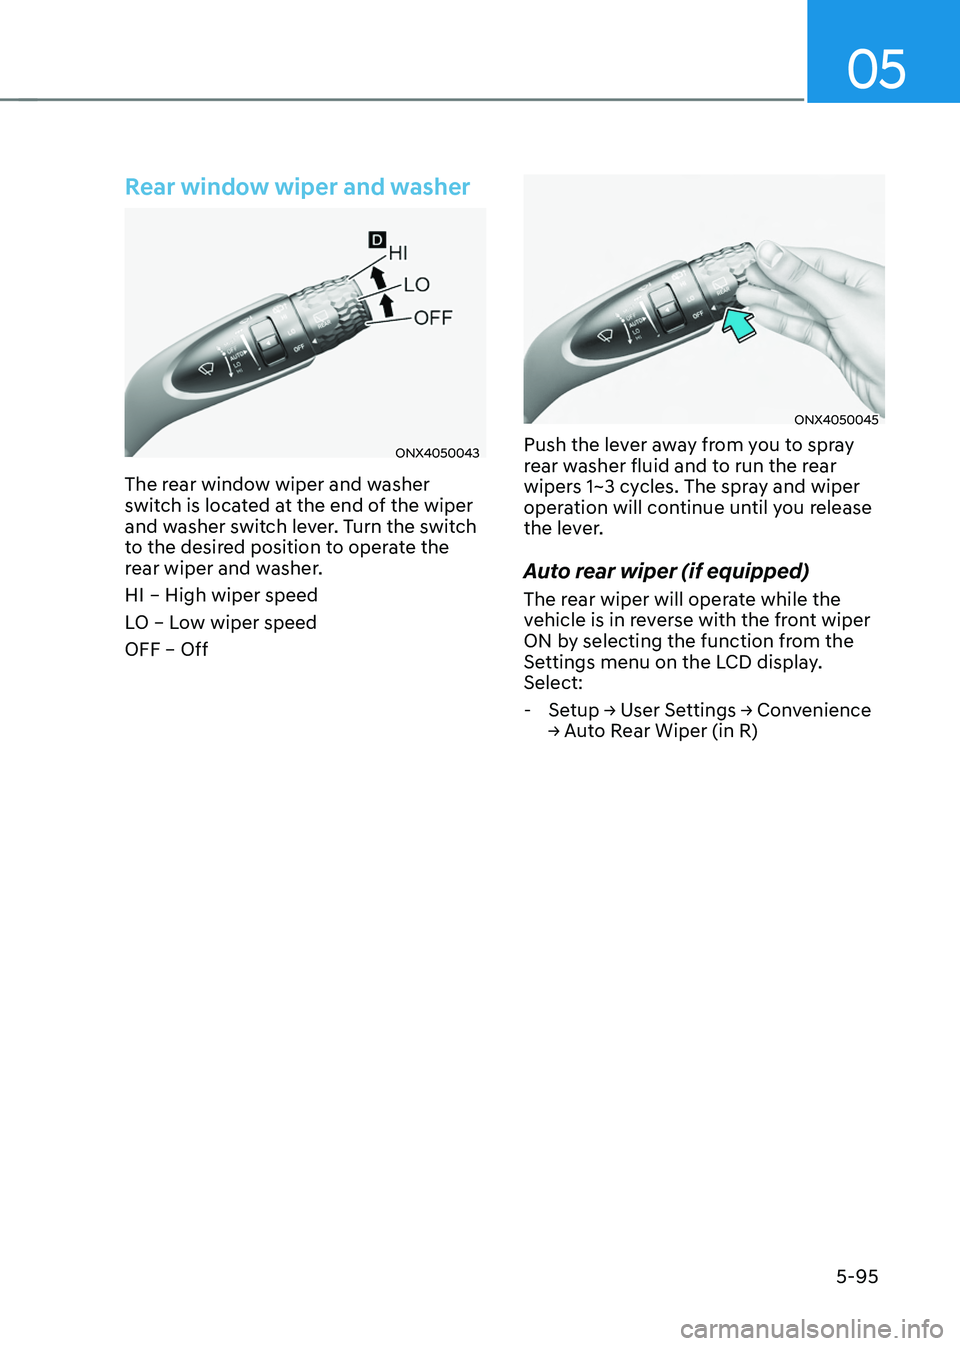 HYUNDAI TUCSON HYBRID 2021  Owners Manual 05
5-95
Rear window wiper and washer
ONX4050043
The rear window wiper and washer 
switch is located at the end of the wiper 
and washer switch lever. Turn the switch 
to the desired position to operat